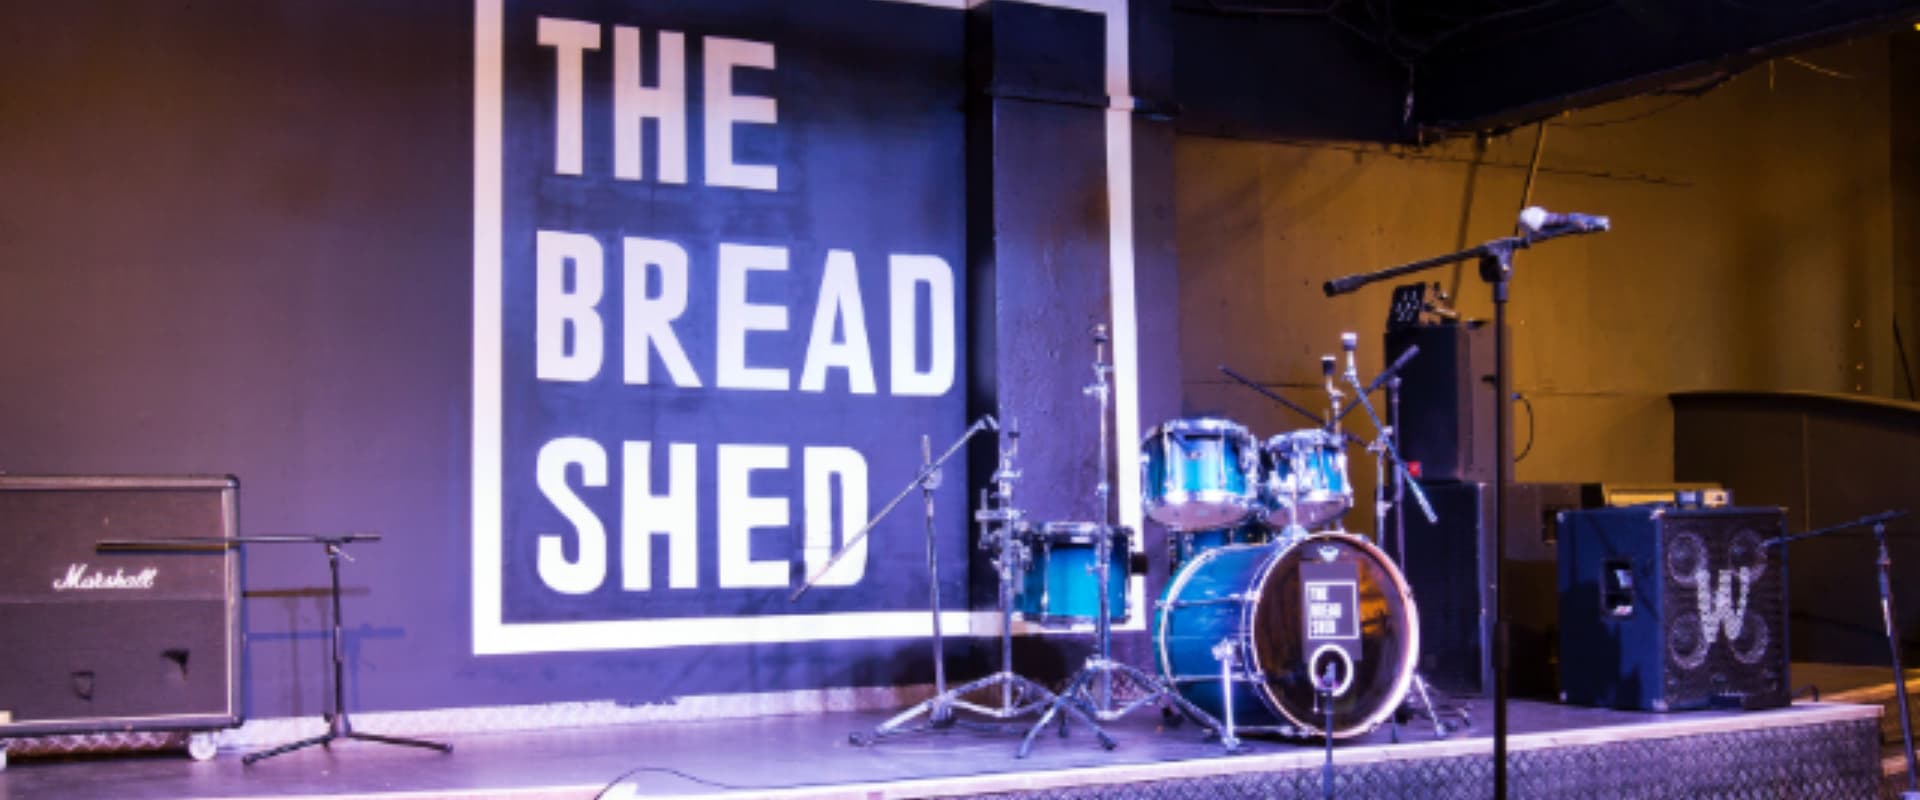 The Bread Shed 